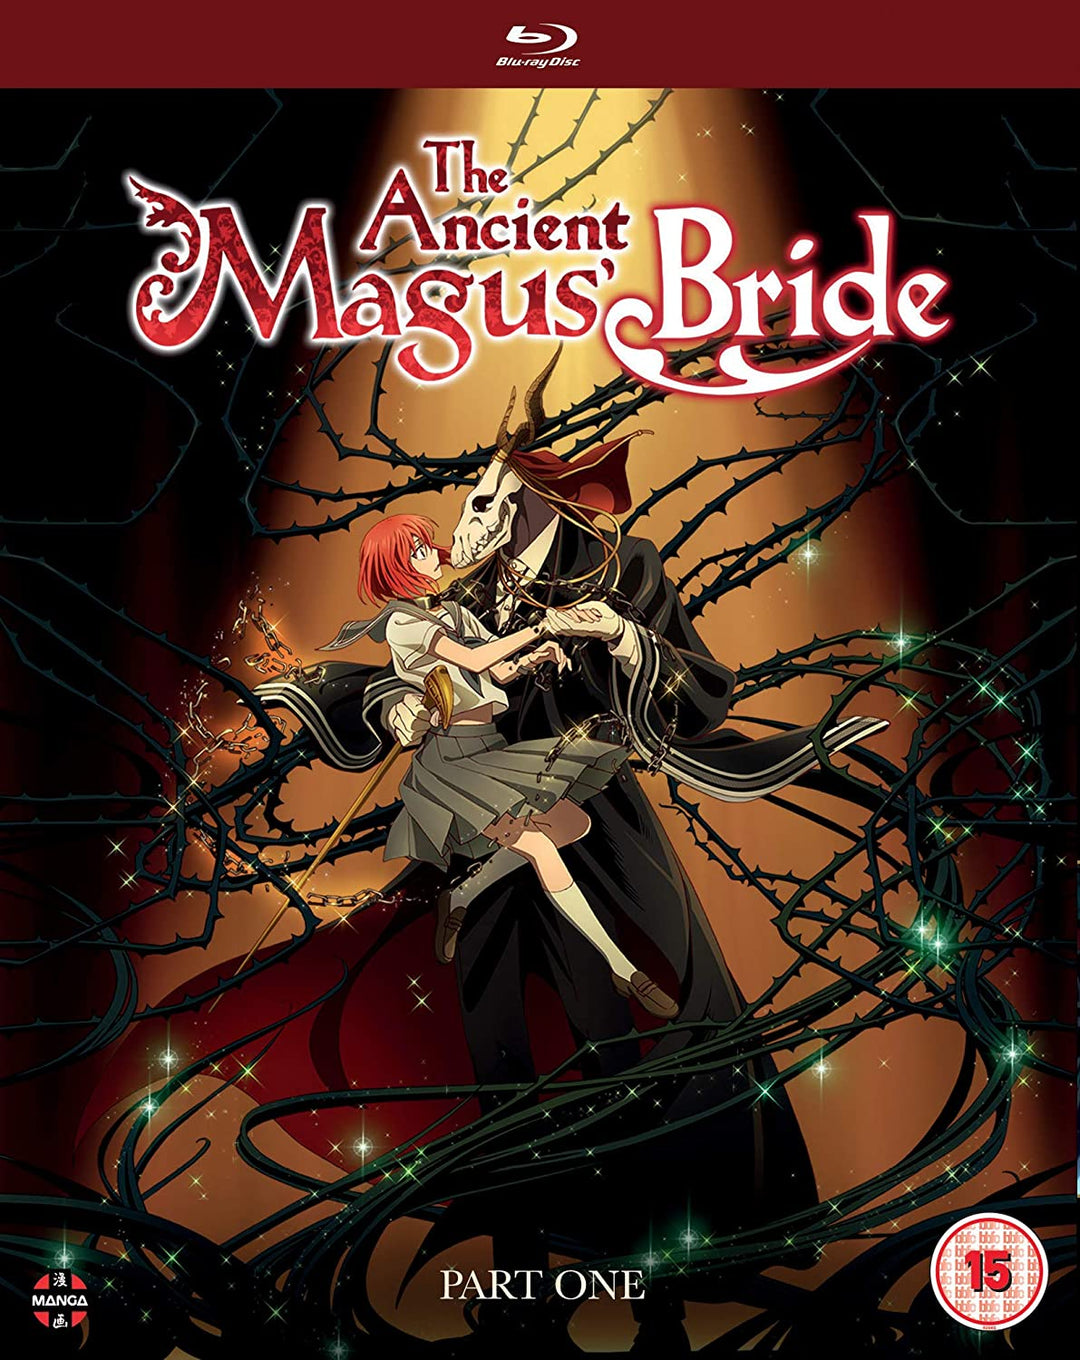 The Ancient Magus Bride - Part One [Blu-ray]